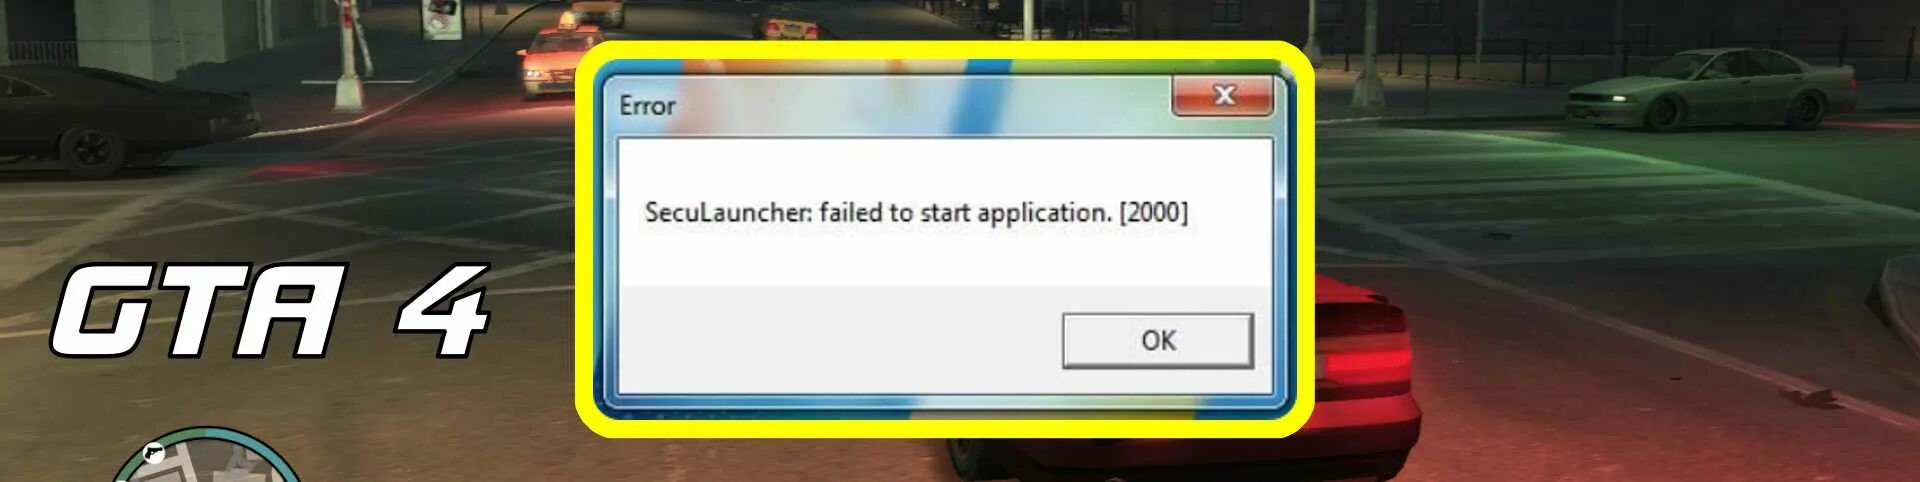 Failed to start application 2000. Ошибка ГТА 4 Seculauncher failed to start application 2000. Error Seculauncher: failed to start application. [2000]. Seculauncher failed to start application 2000. При запуске игры ошибка Seculauncher failed to start application 2000.